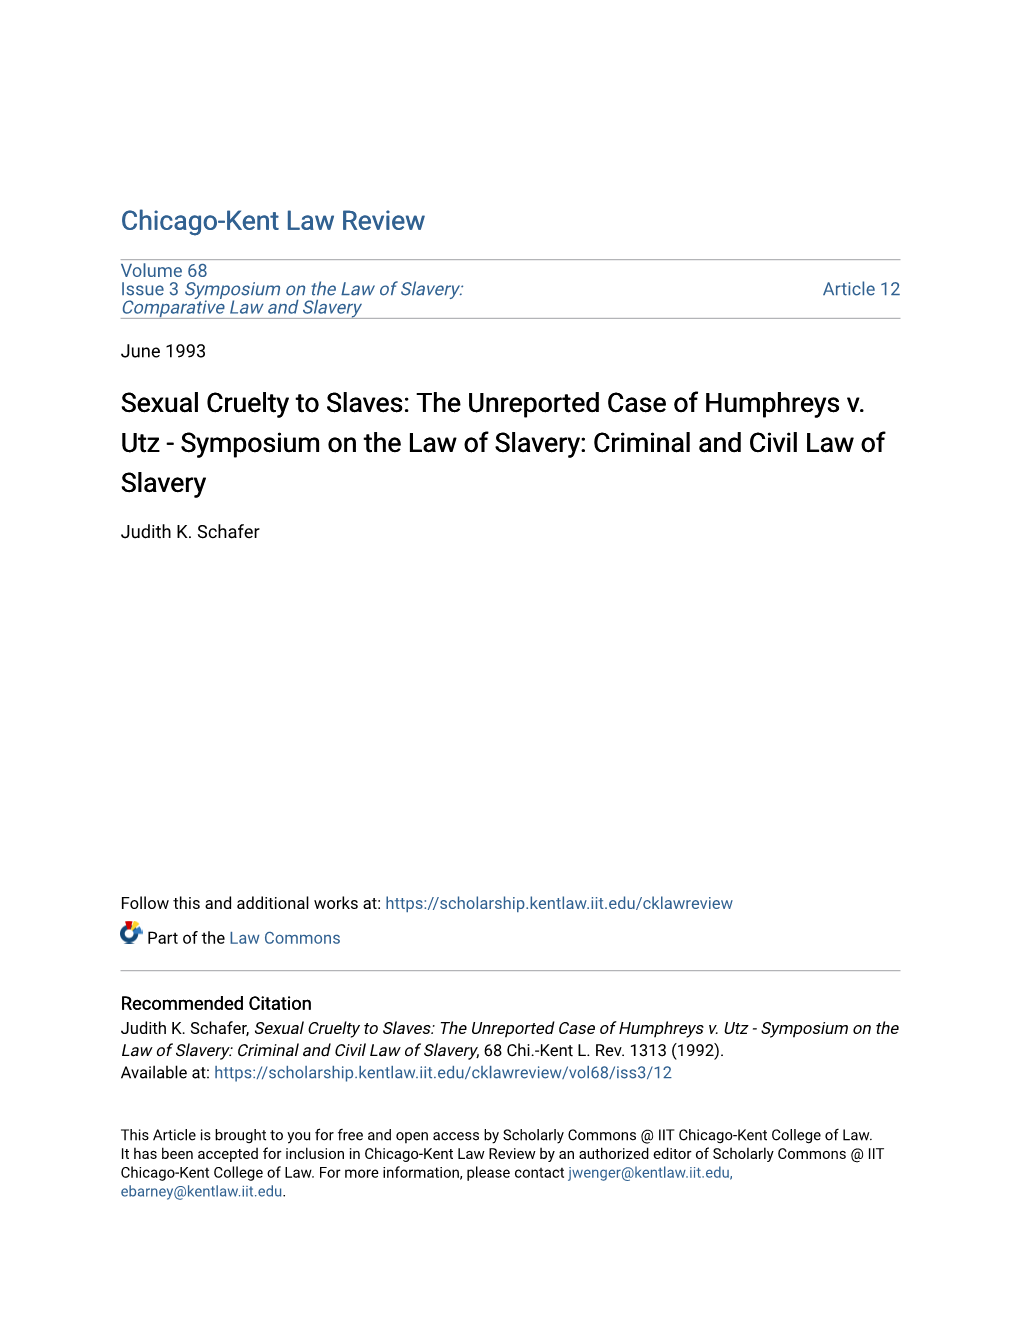 Sexual Cruelty to Slaves: the Unreported Case of Humphreys V. Utz - Symposium on the Law of Slavery: Criminal and Civil Law of Slavery